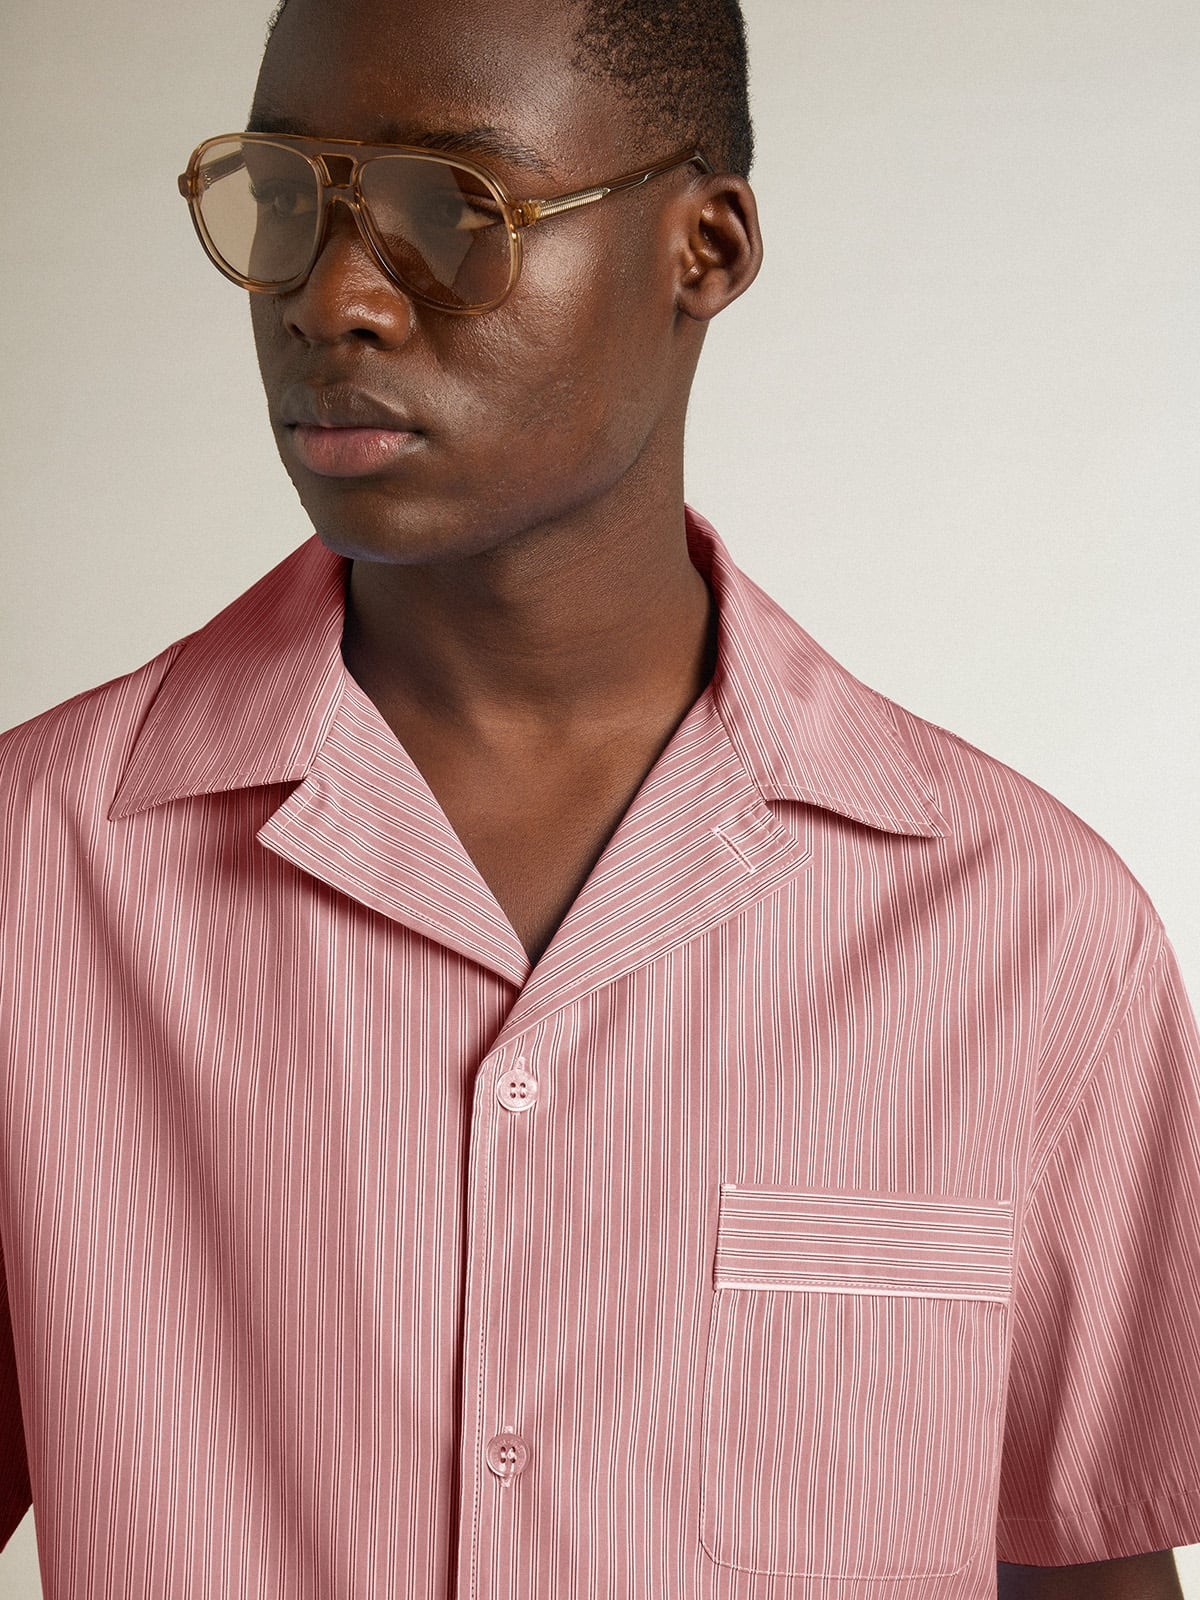 Men's shirt in white and red striped cotton poplin - 7